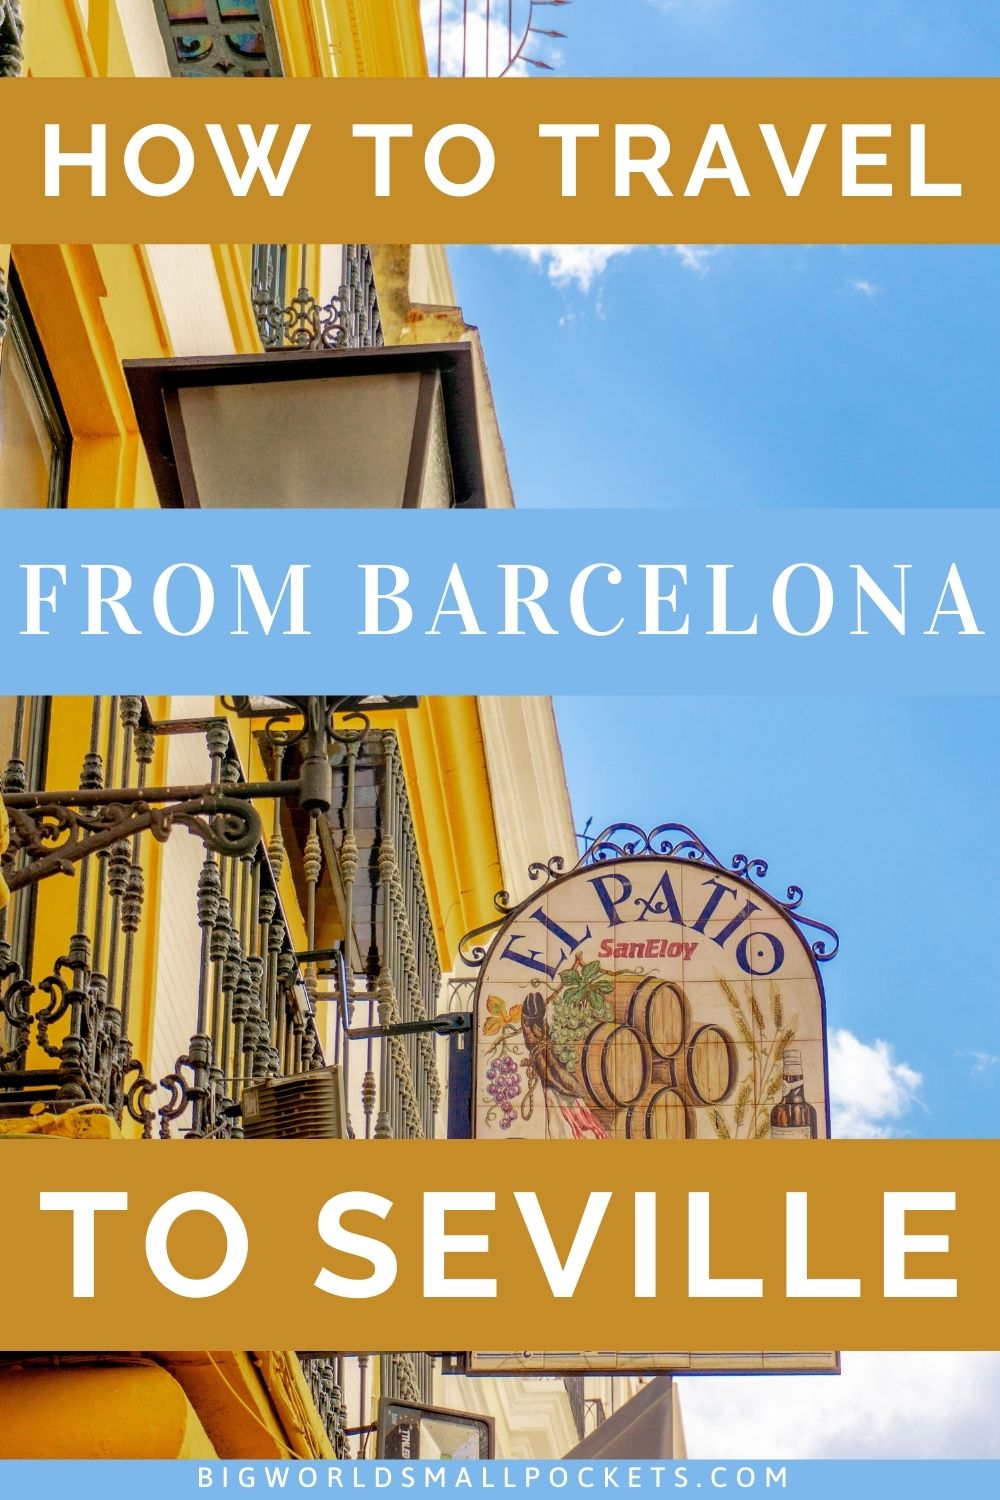 How to Travel from Barcelona to Seville in Spain